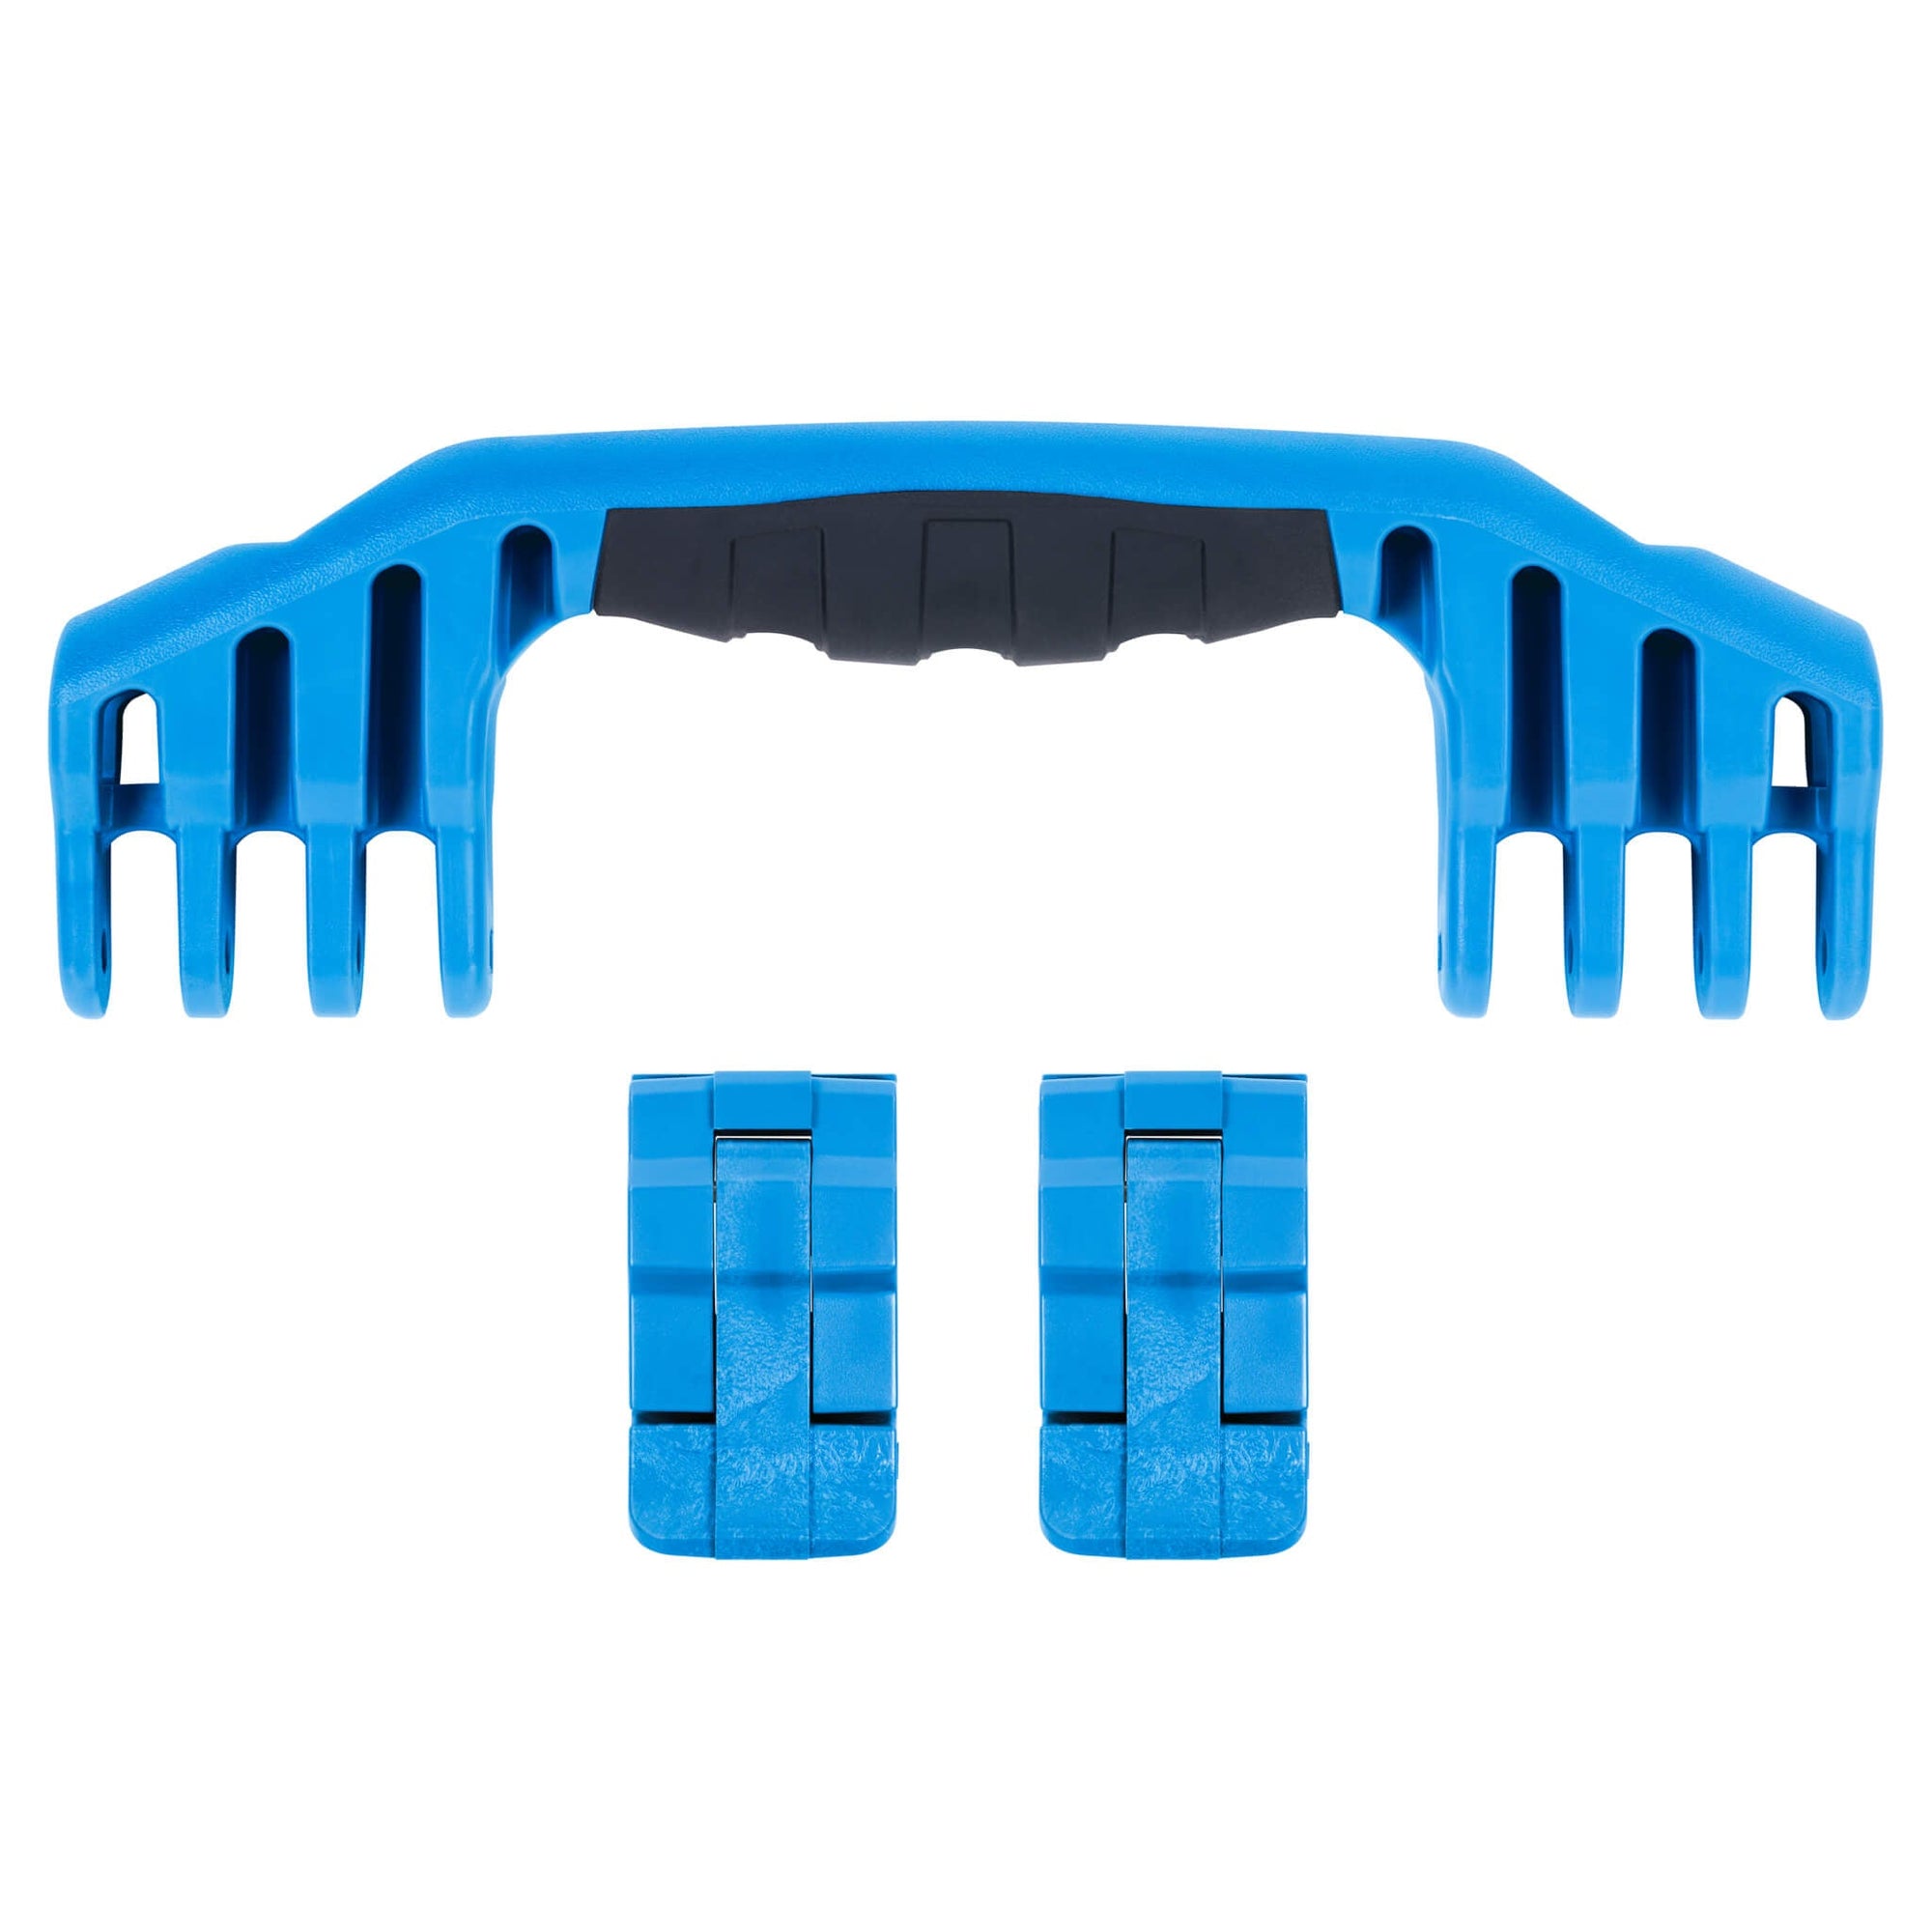 Pelican 1550 Replacement Handle & Latches, Blue (Set of 1 Handle, 2 Latches) ColorCase 